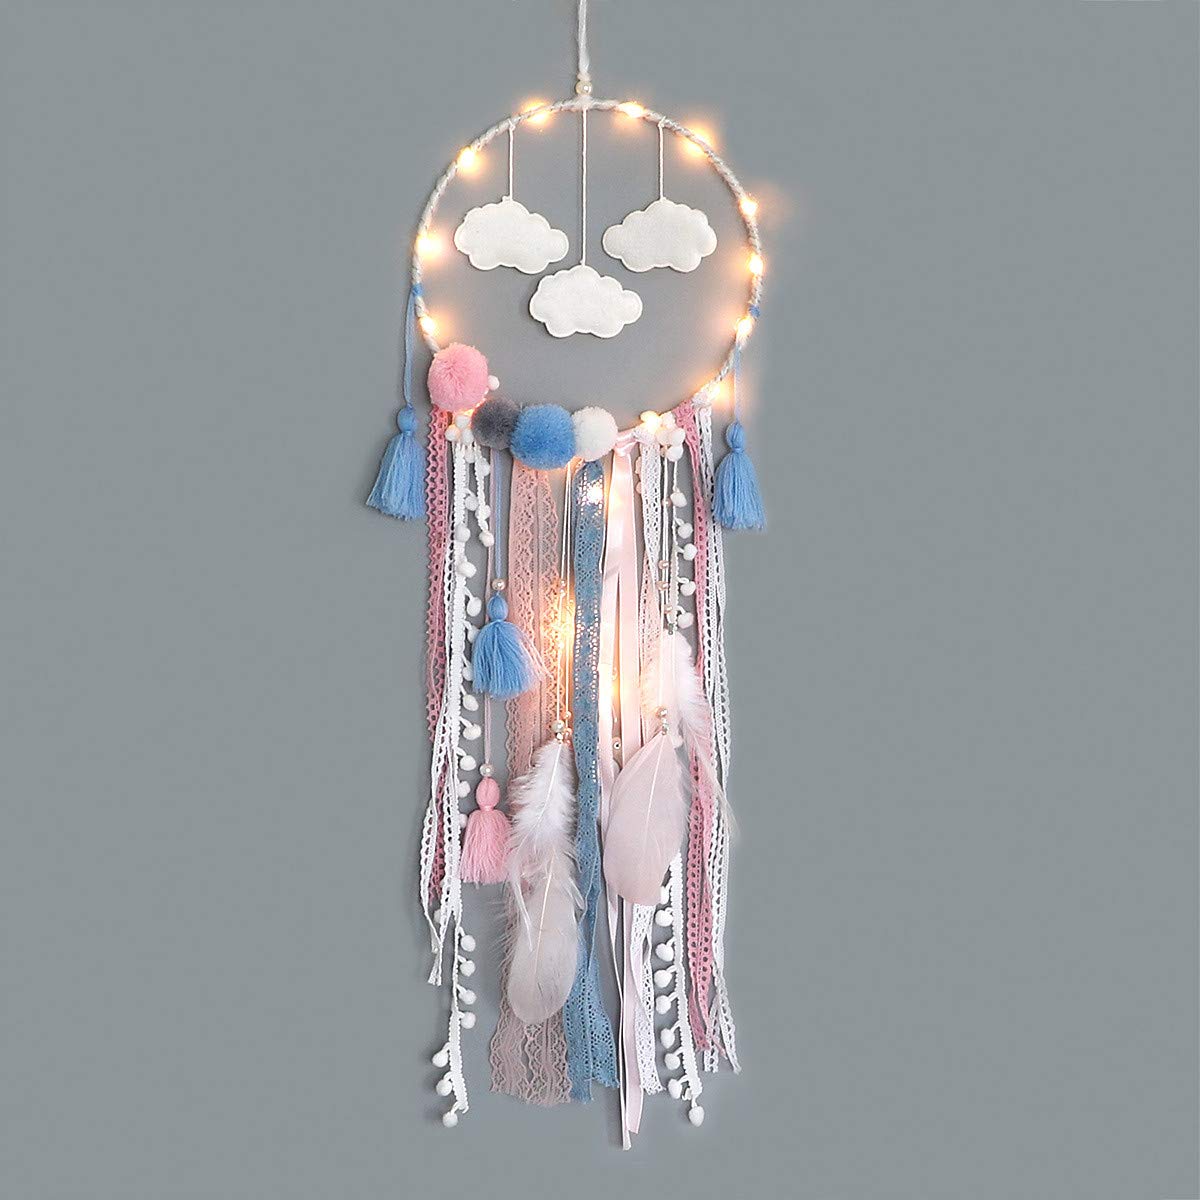 Book Cover Dremisland Dream Catcher Handmade Traditional White Cloud Dream Catcher with Led String Lights Wall Hanging Kids Room Decor Nursery Wall Art Ornament Decor Craft Gift (Cloud)